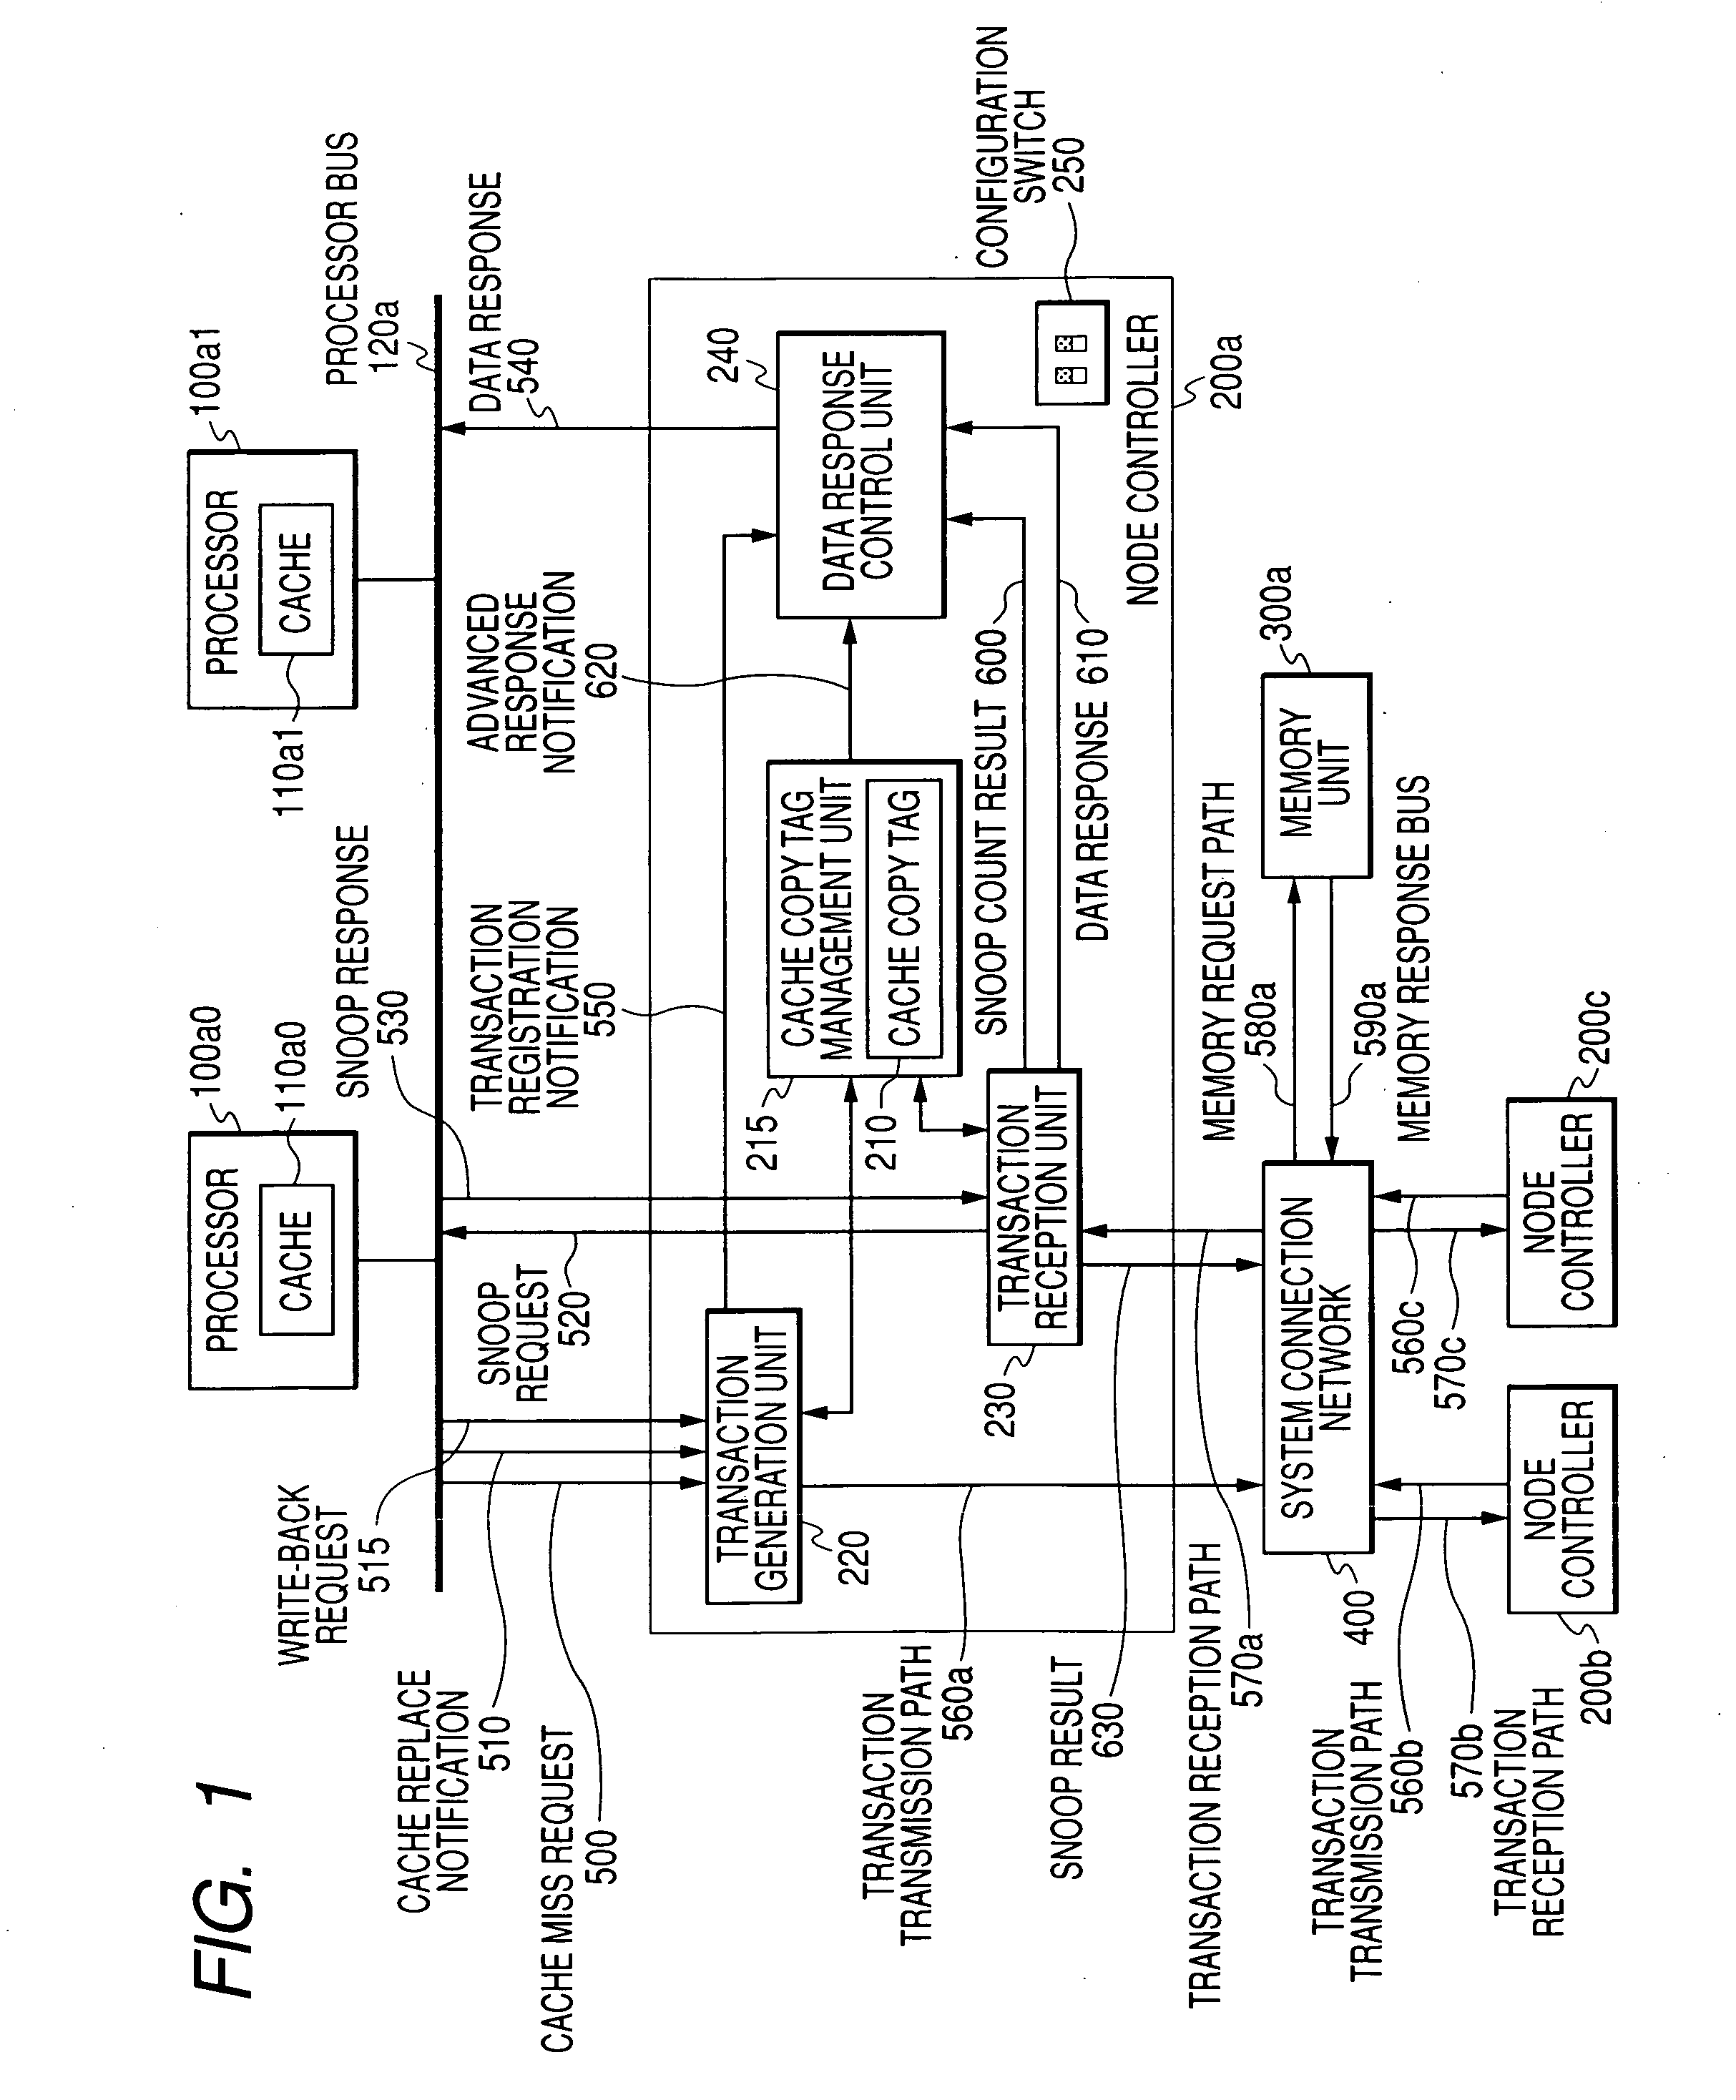 Cache coherency control method, chipset, and multi-processor system